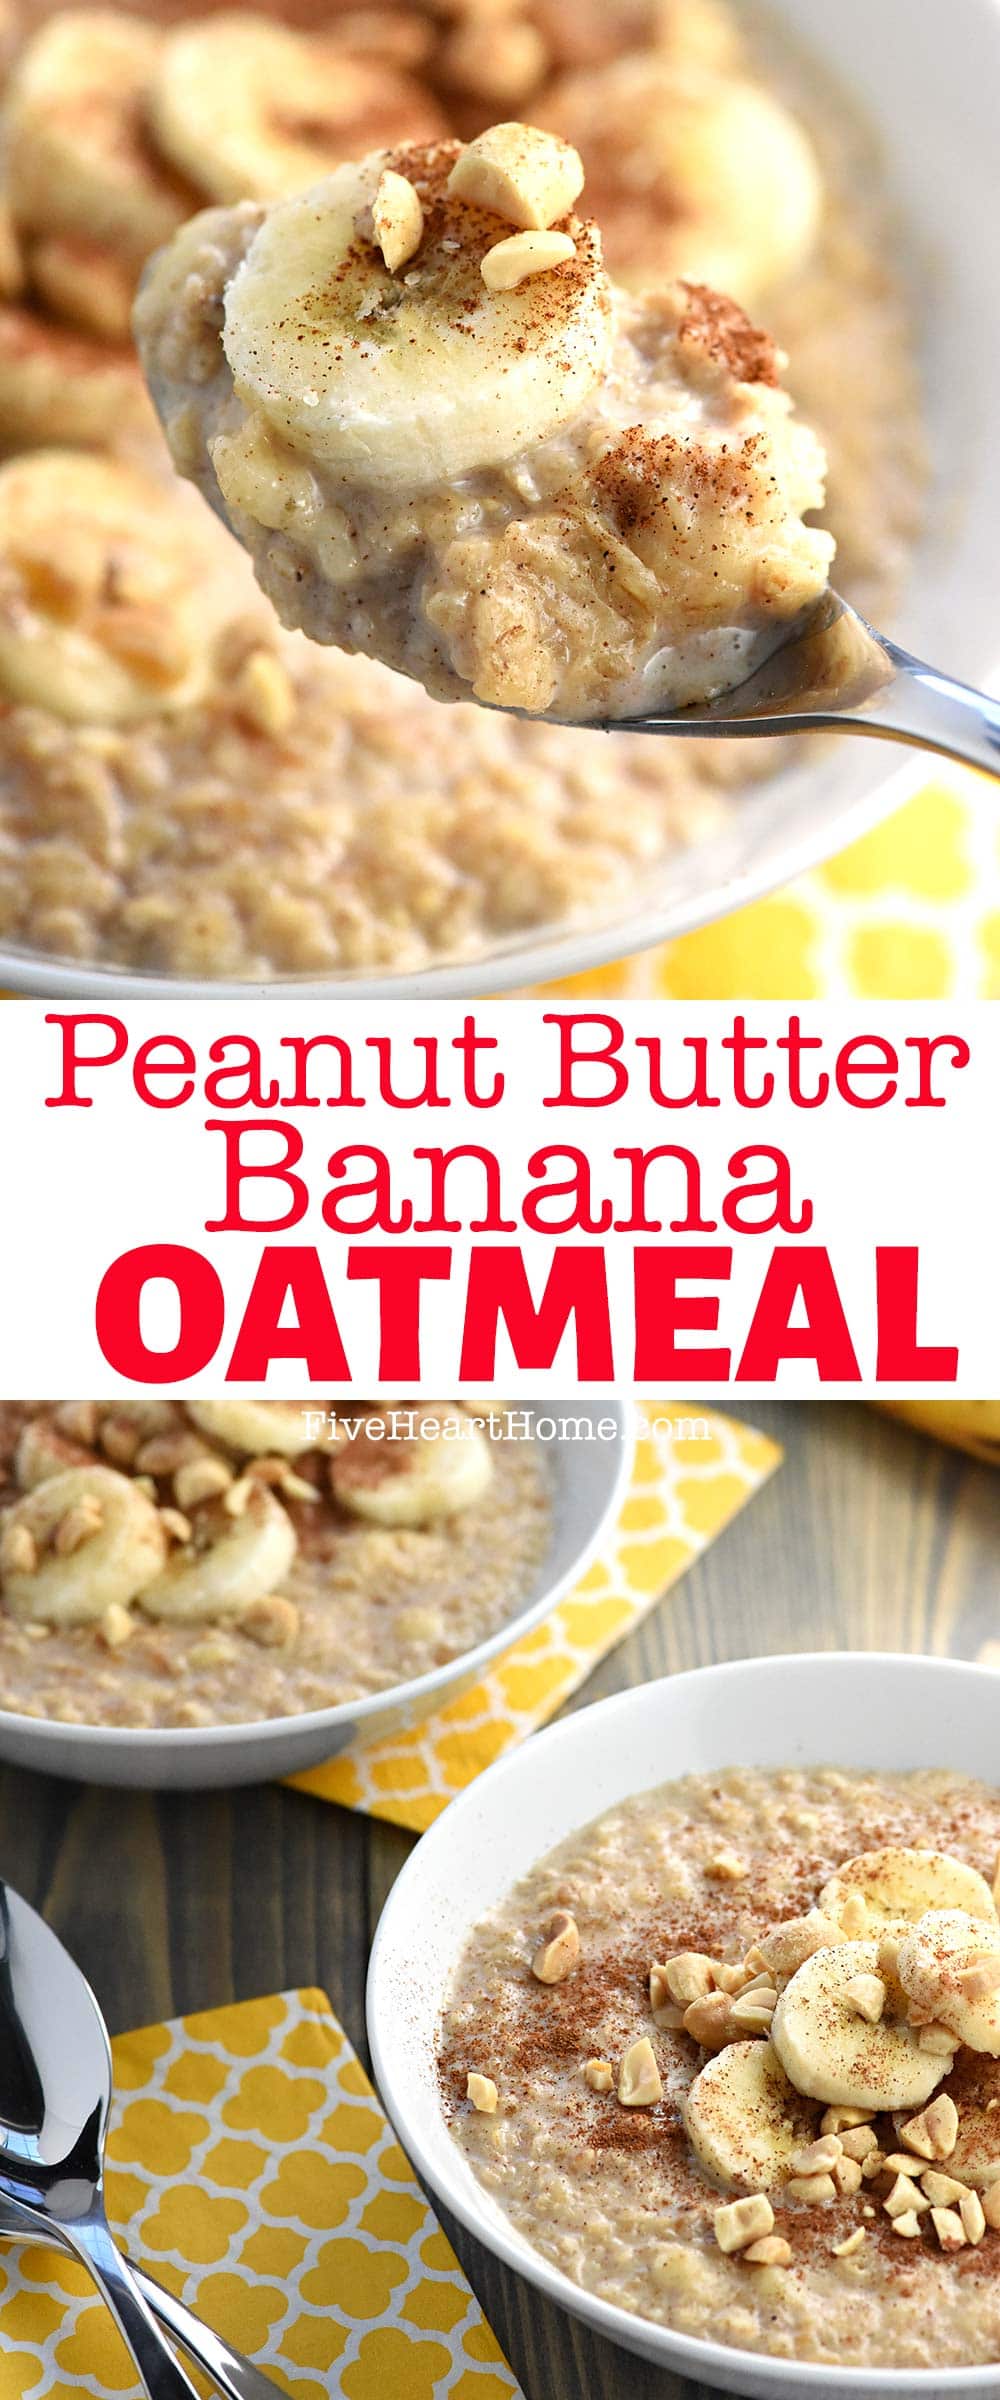 Peanut Butter Banana Oatmeal ~ a hot, wholesome, homemade breakfast that’s ready in a matter of minutes…flavored with cinnamon, sweetened with honey, and topped with crunchy peanuts!  | FiveHeartHome.com via @fivehearthome